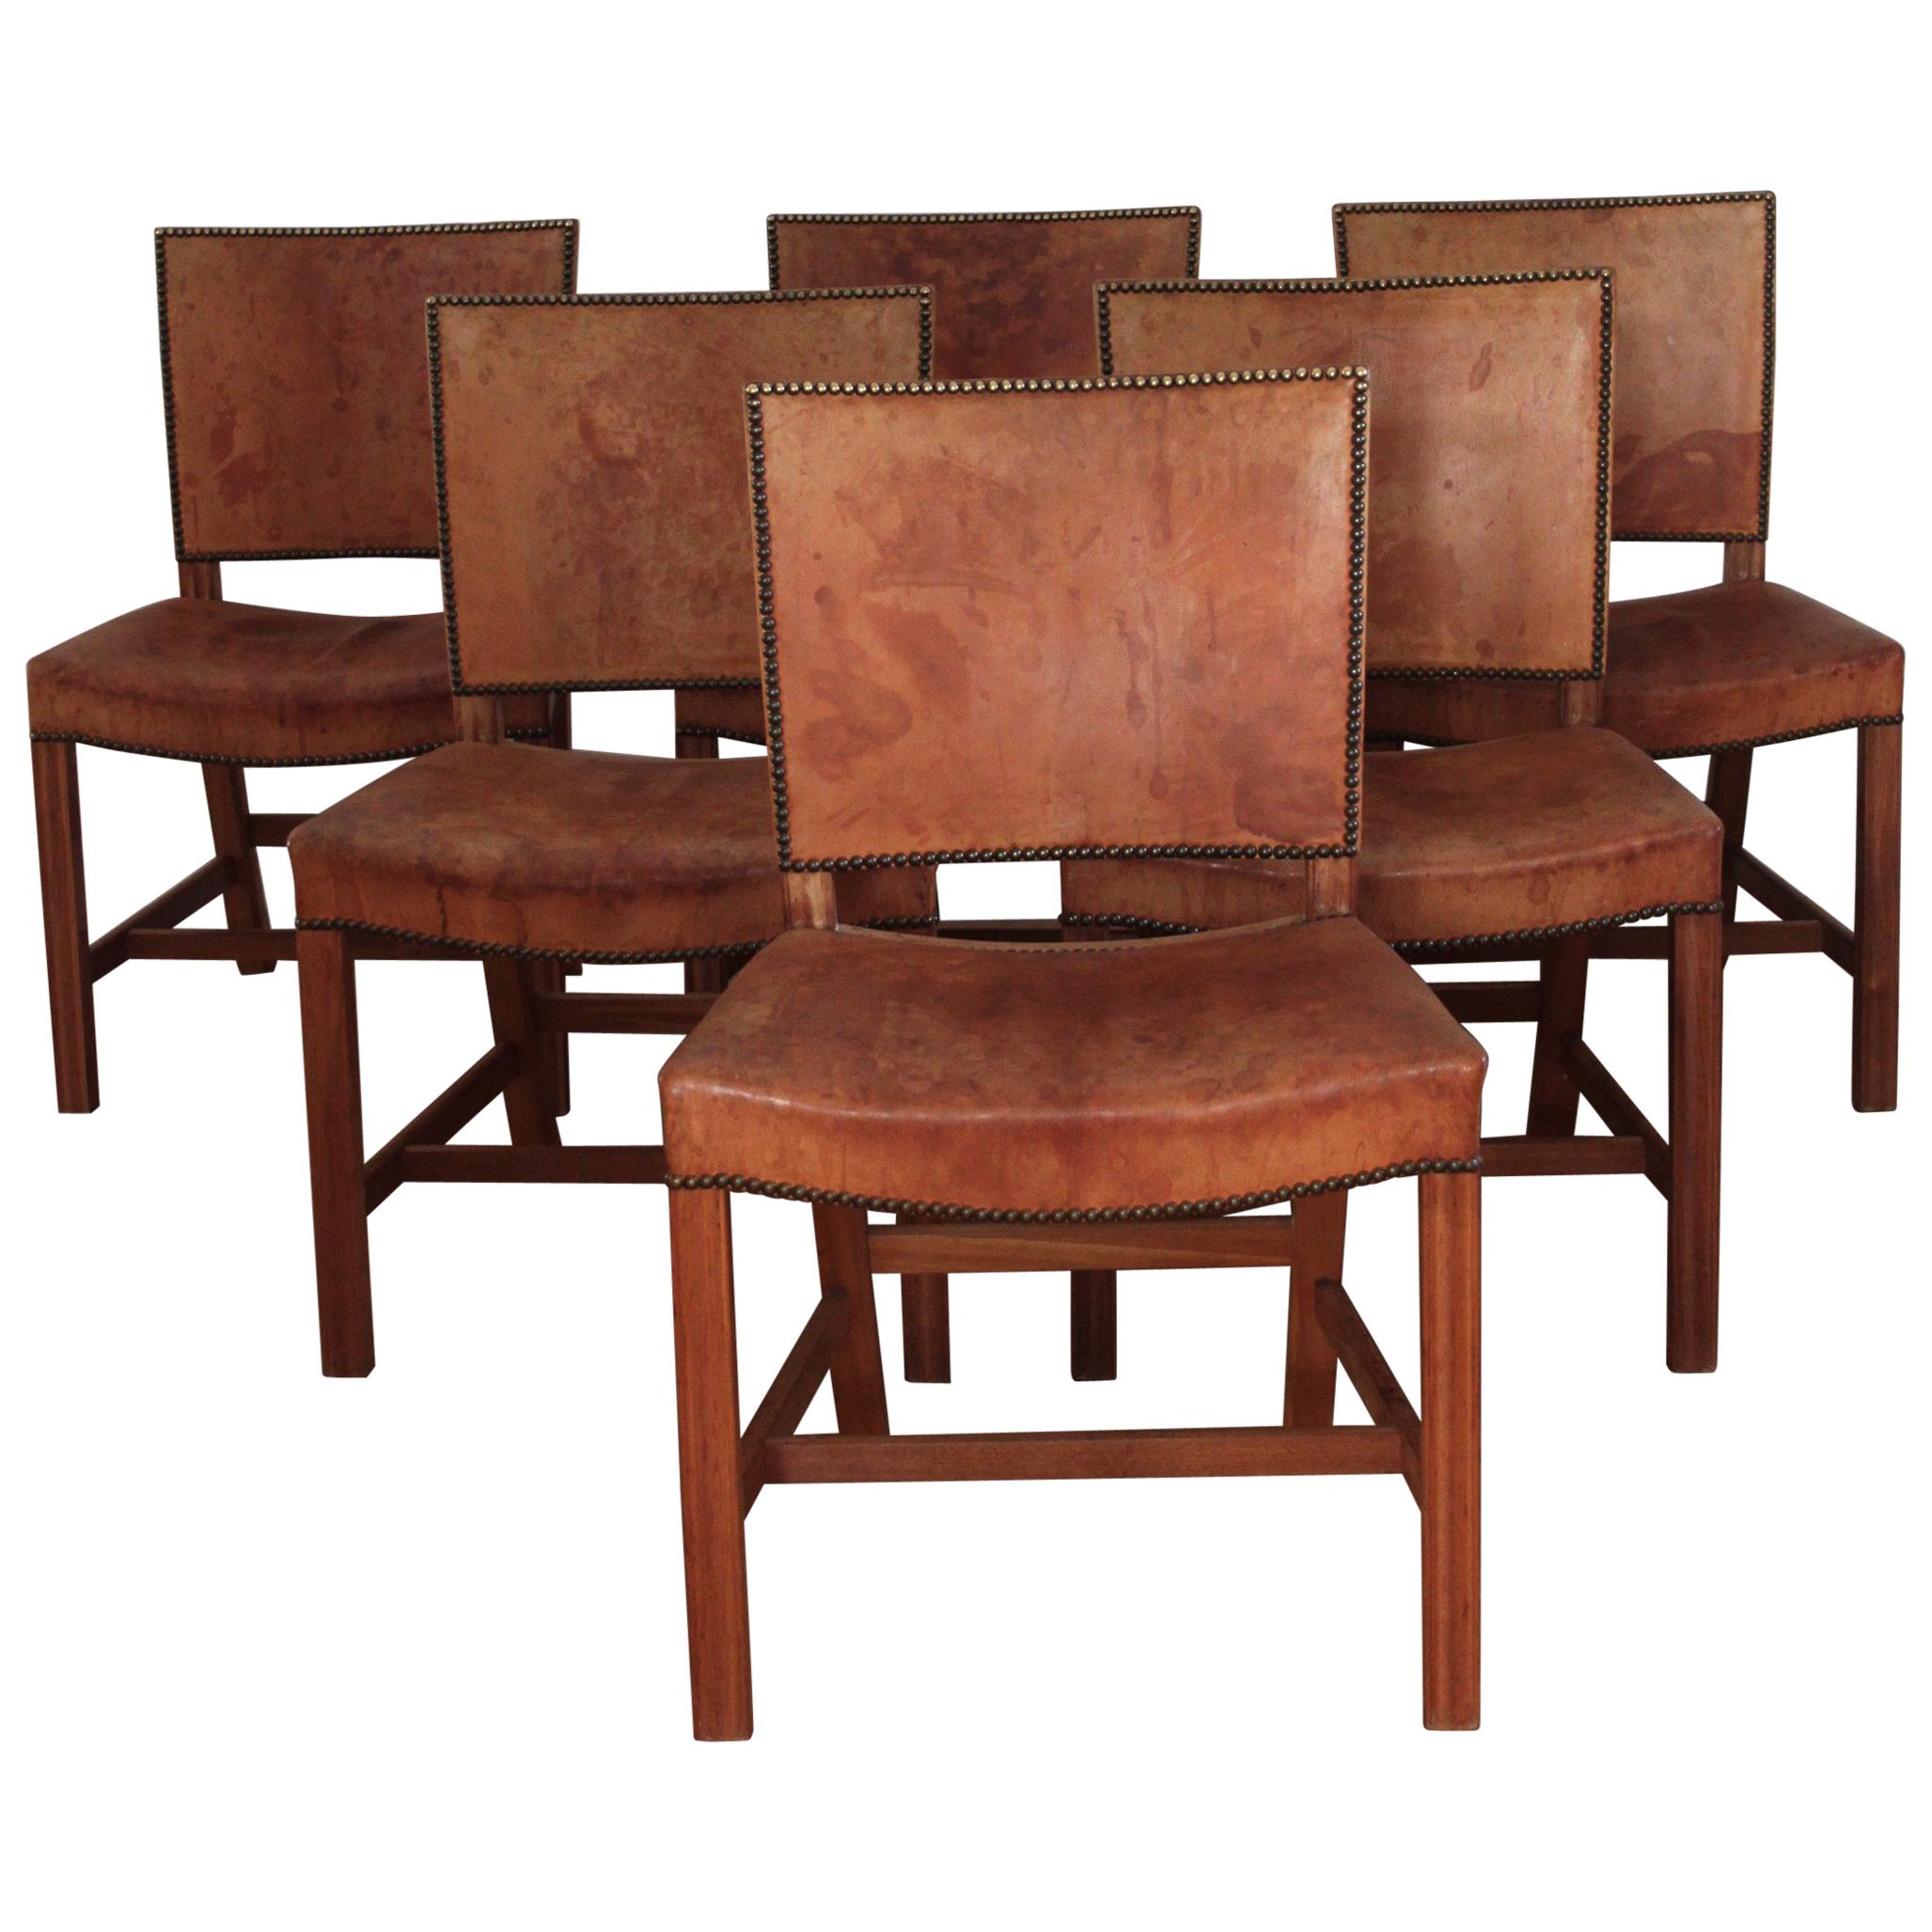 Six Kaare Klint Red Chairs, Mahogany and Original Niger Leather